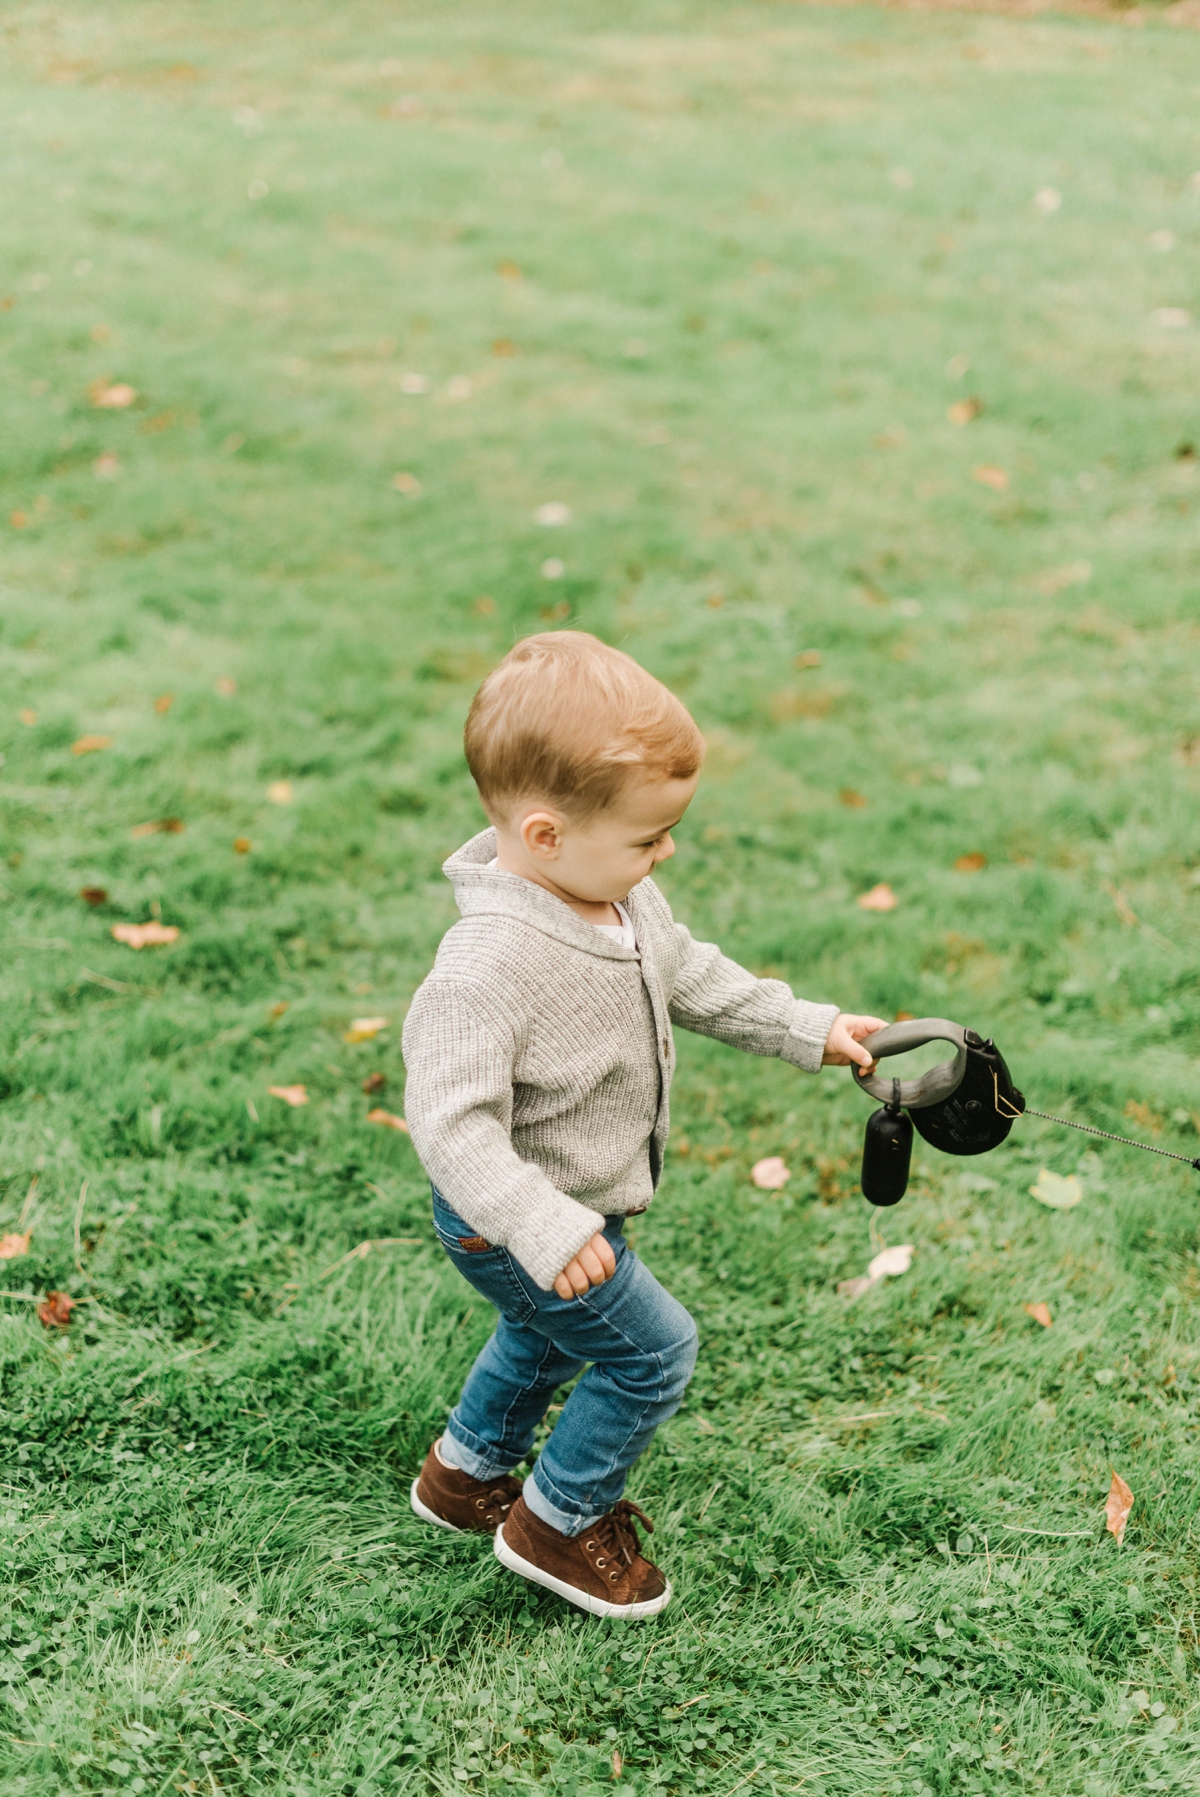 Fall Family Photos at Drummond Park in North Andover, MA by Boston Family Photographer Annmarie Swift